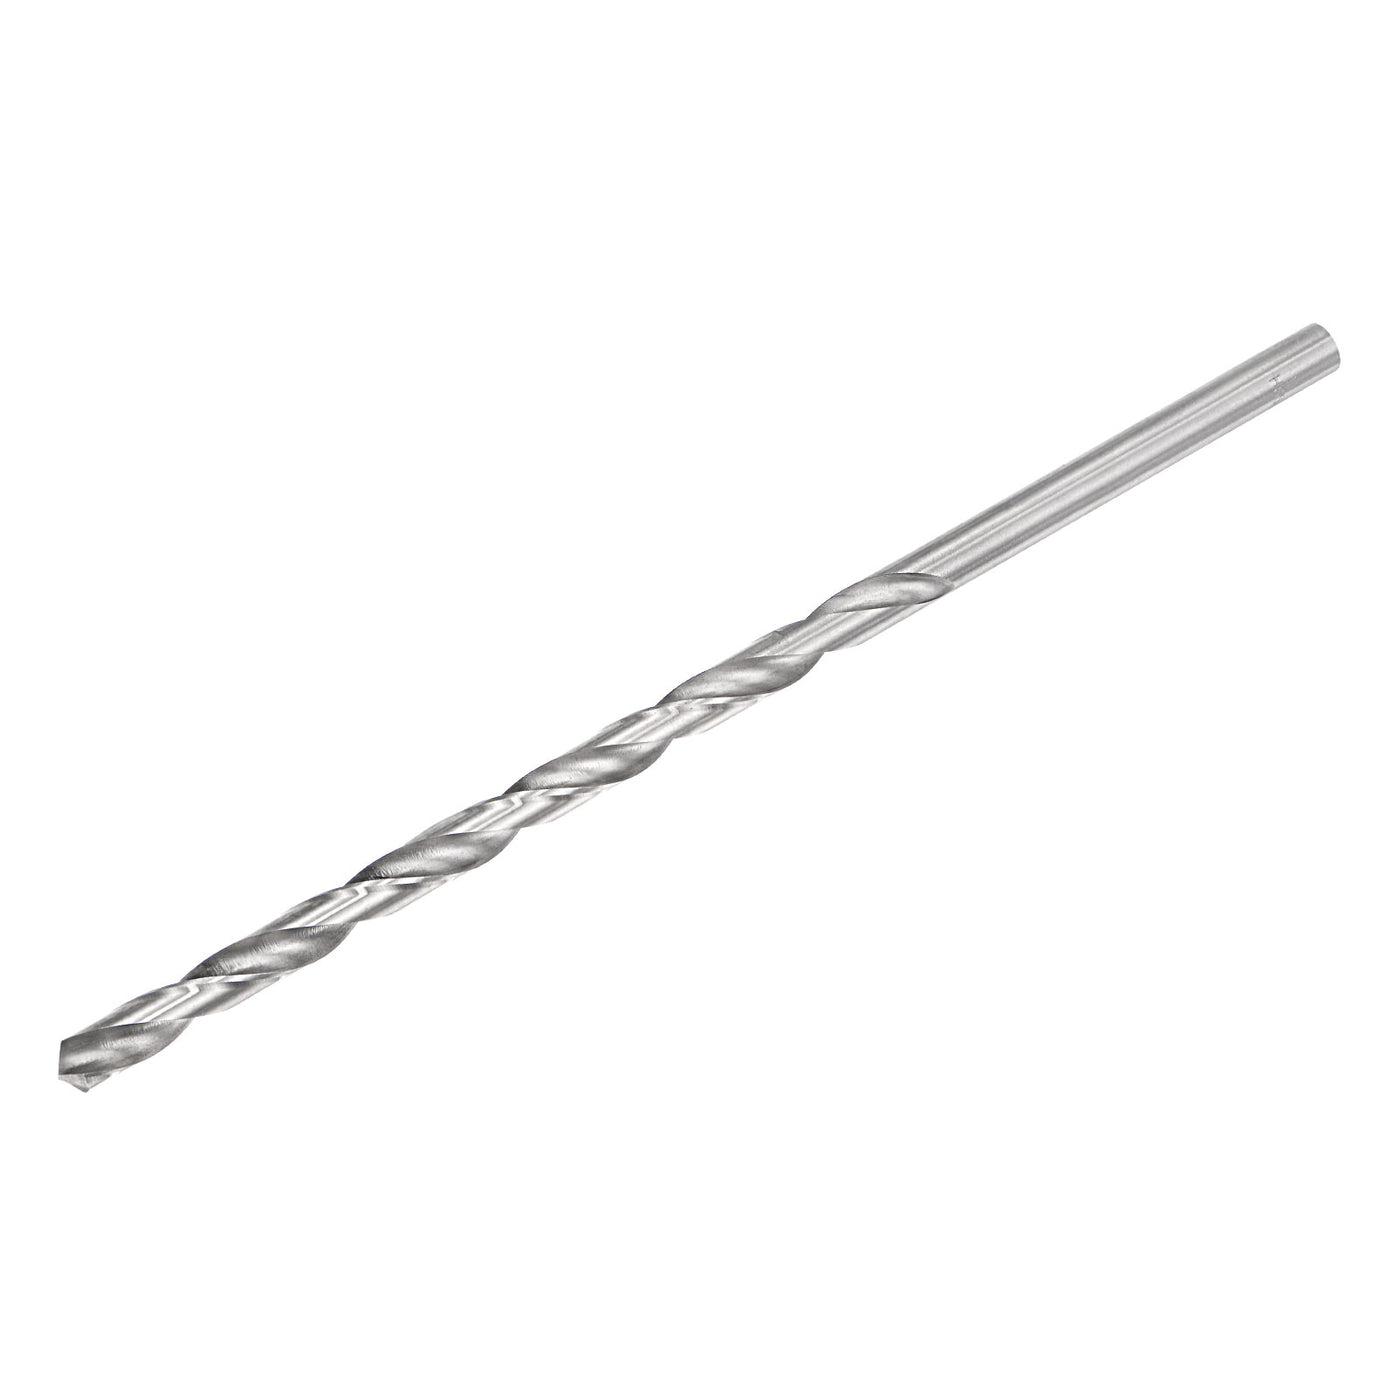 uxcell Uxcell 11mm Twist Drill Bits, High-Speed Steel Extra Long Drill Bit 300mm Length